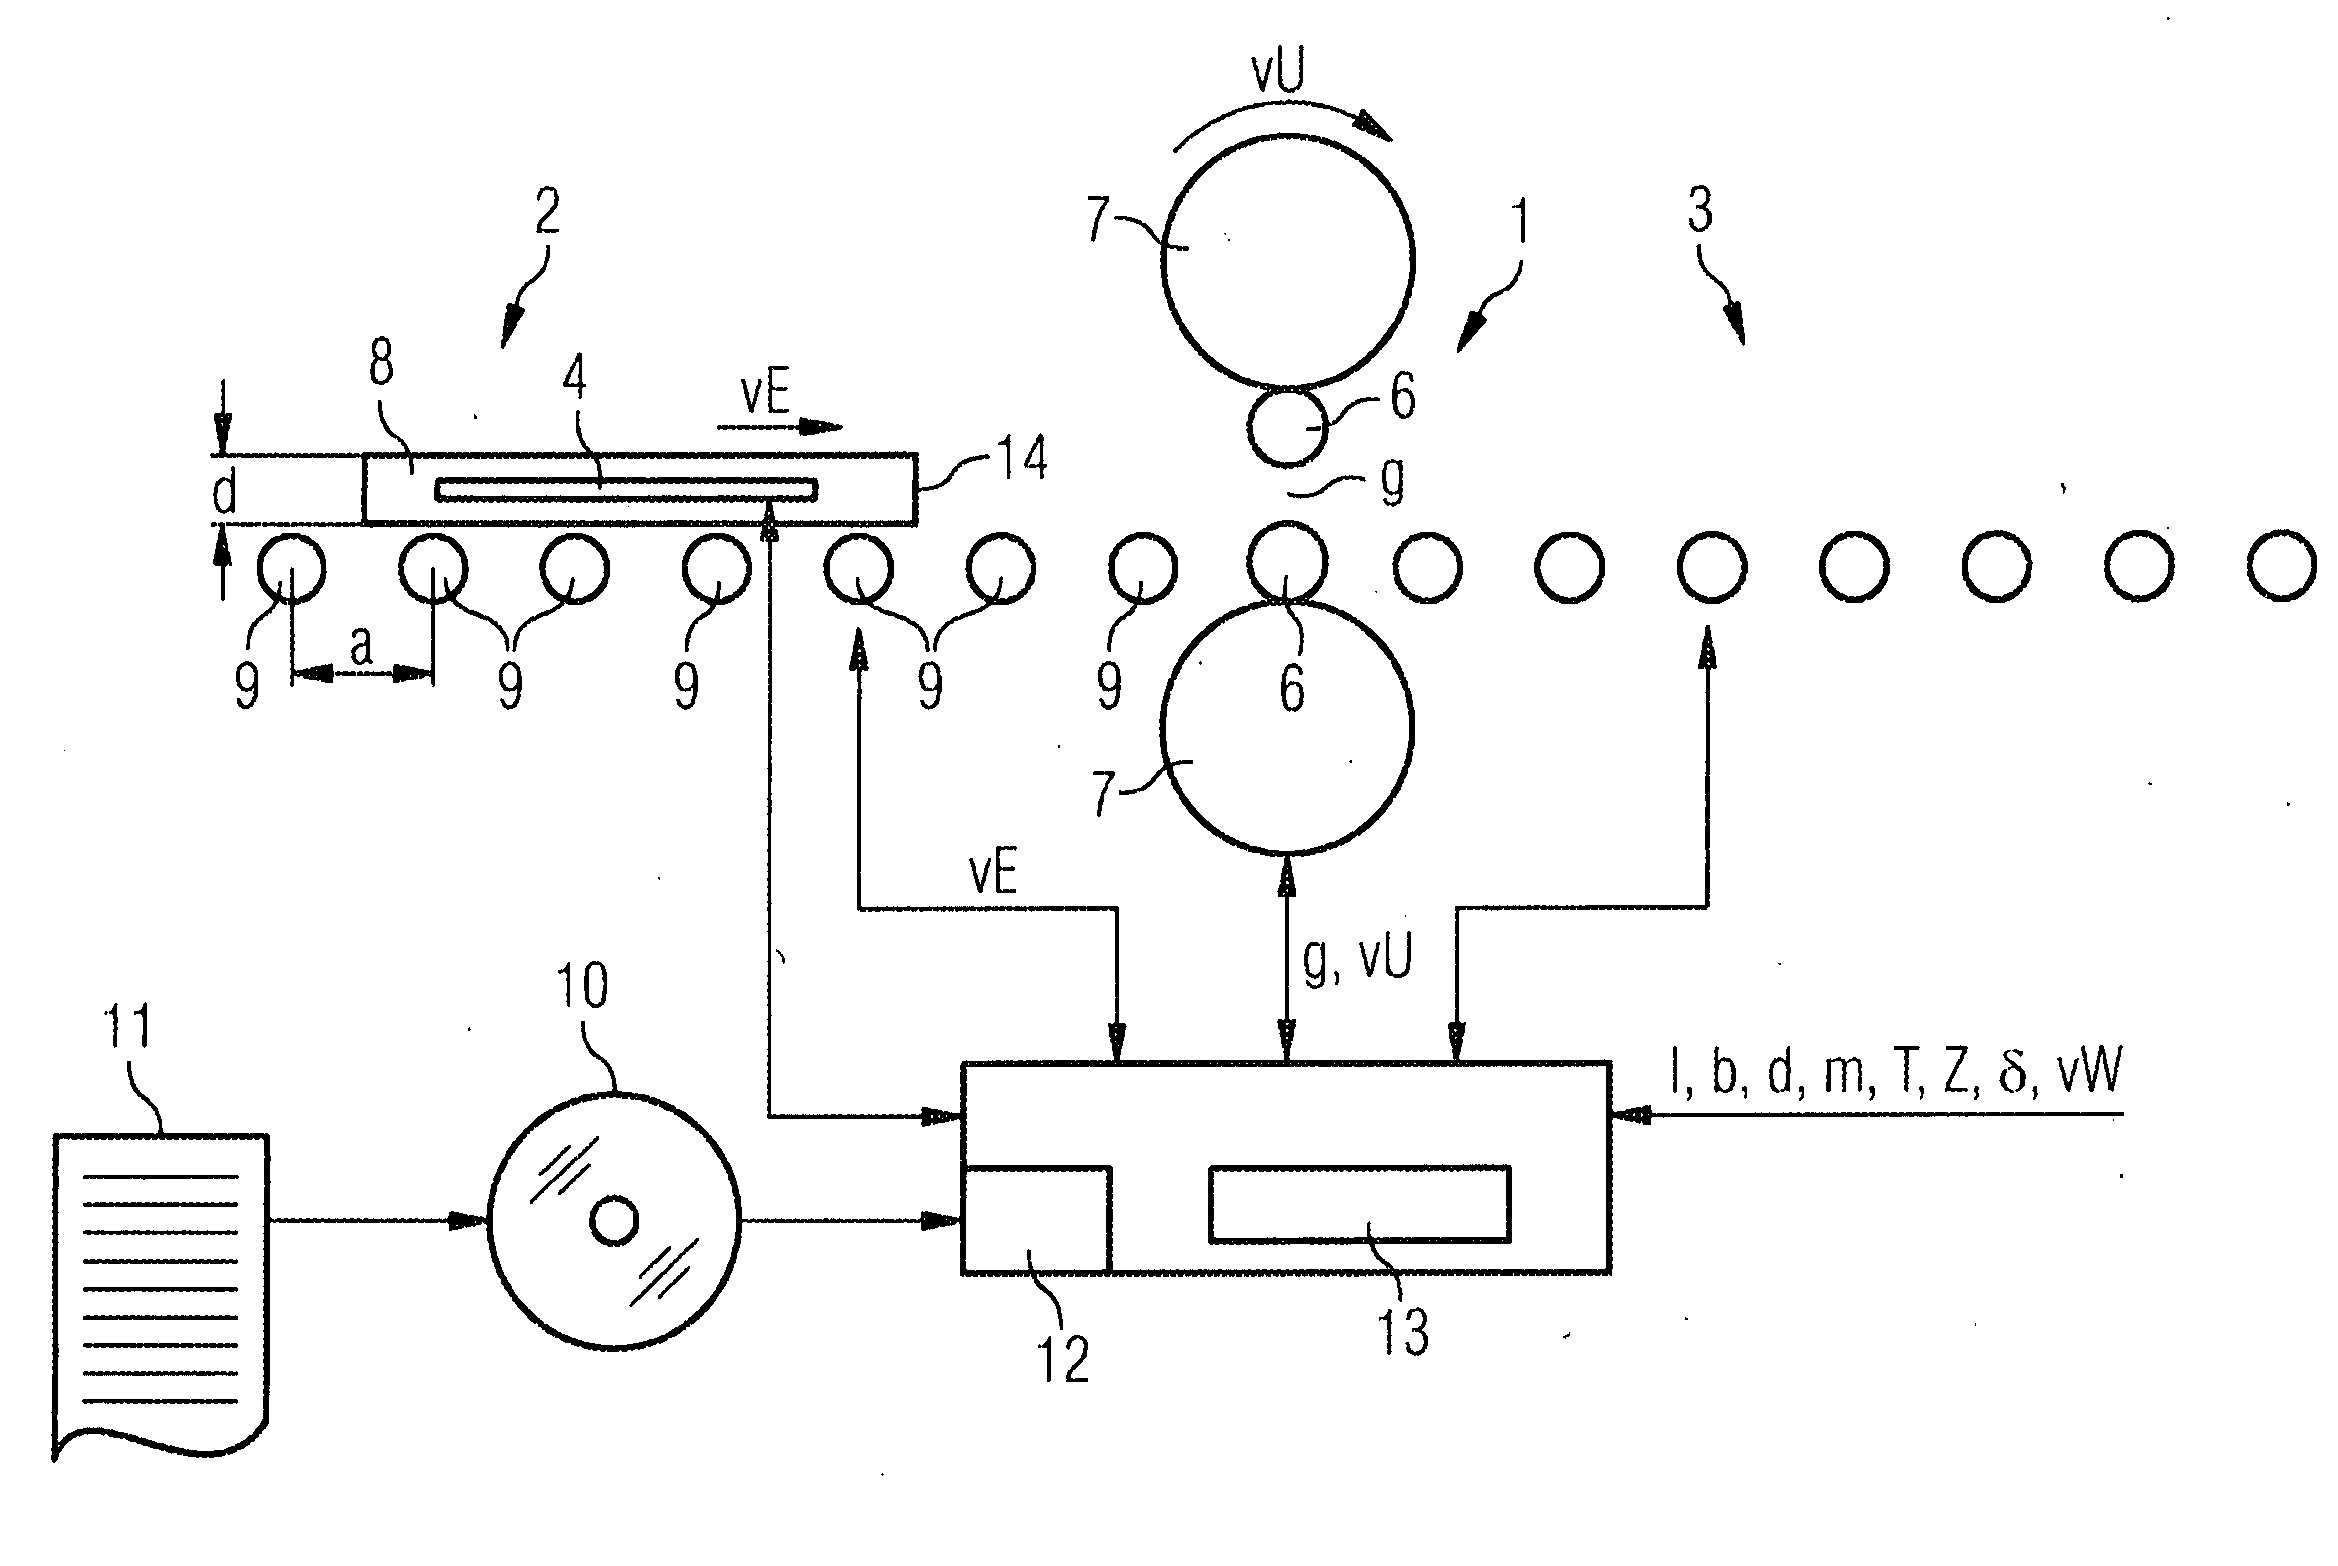 Method For The Operation Of A Rolling Mill Used For Milling A Strip-Shaped Rolling Stock